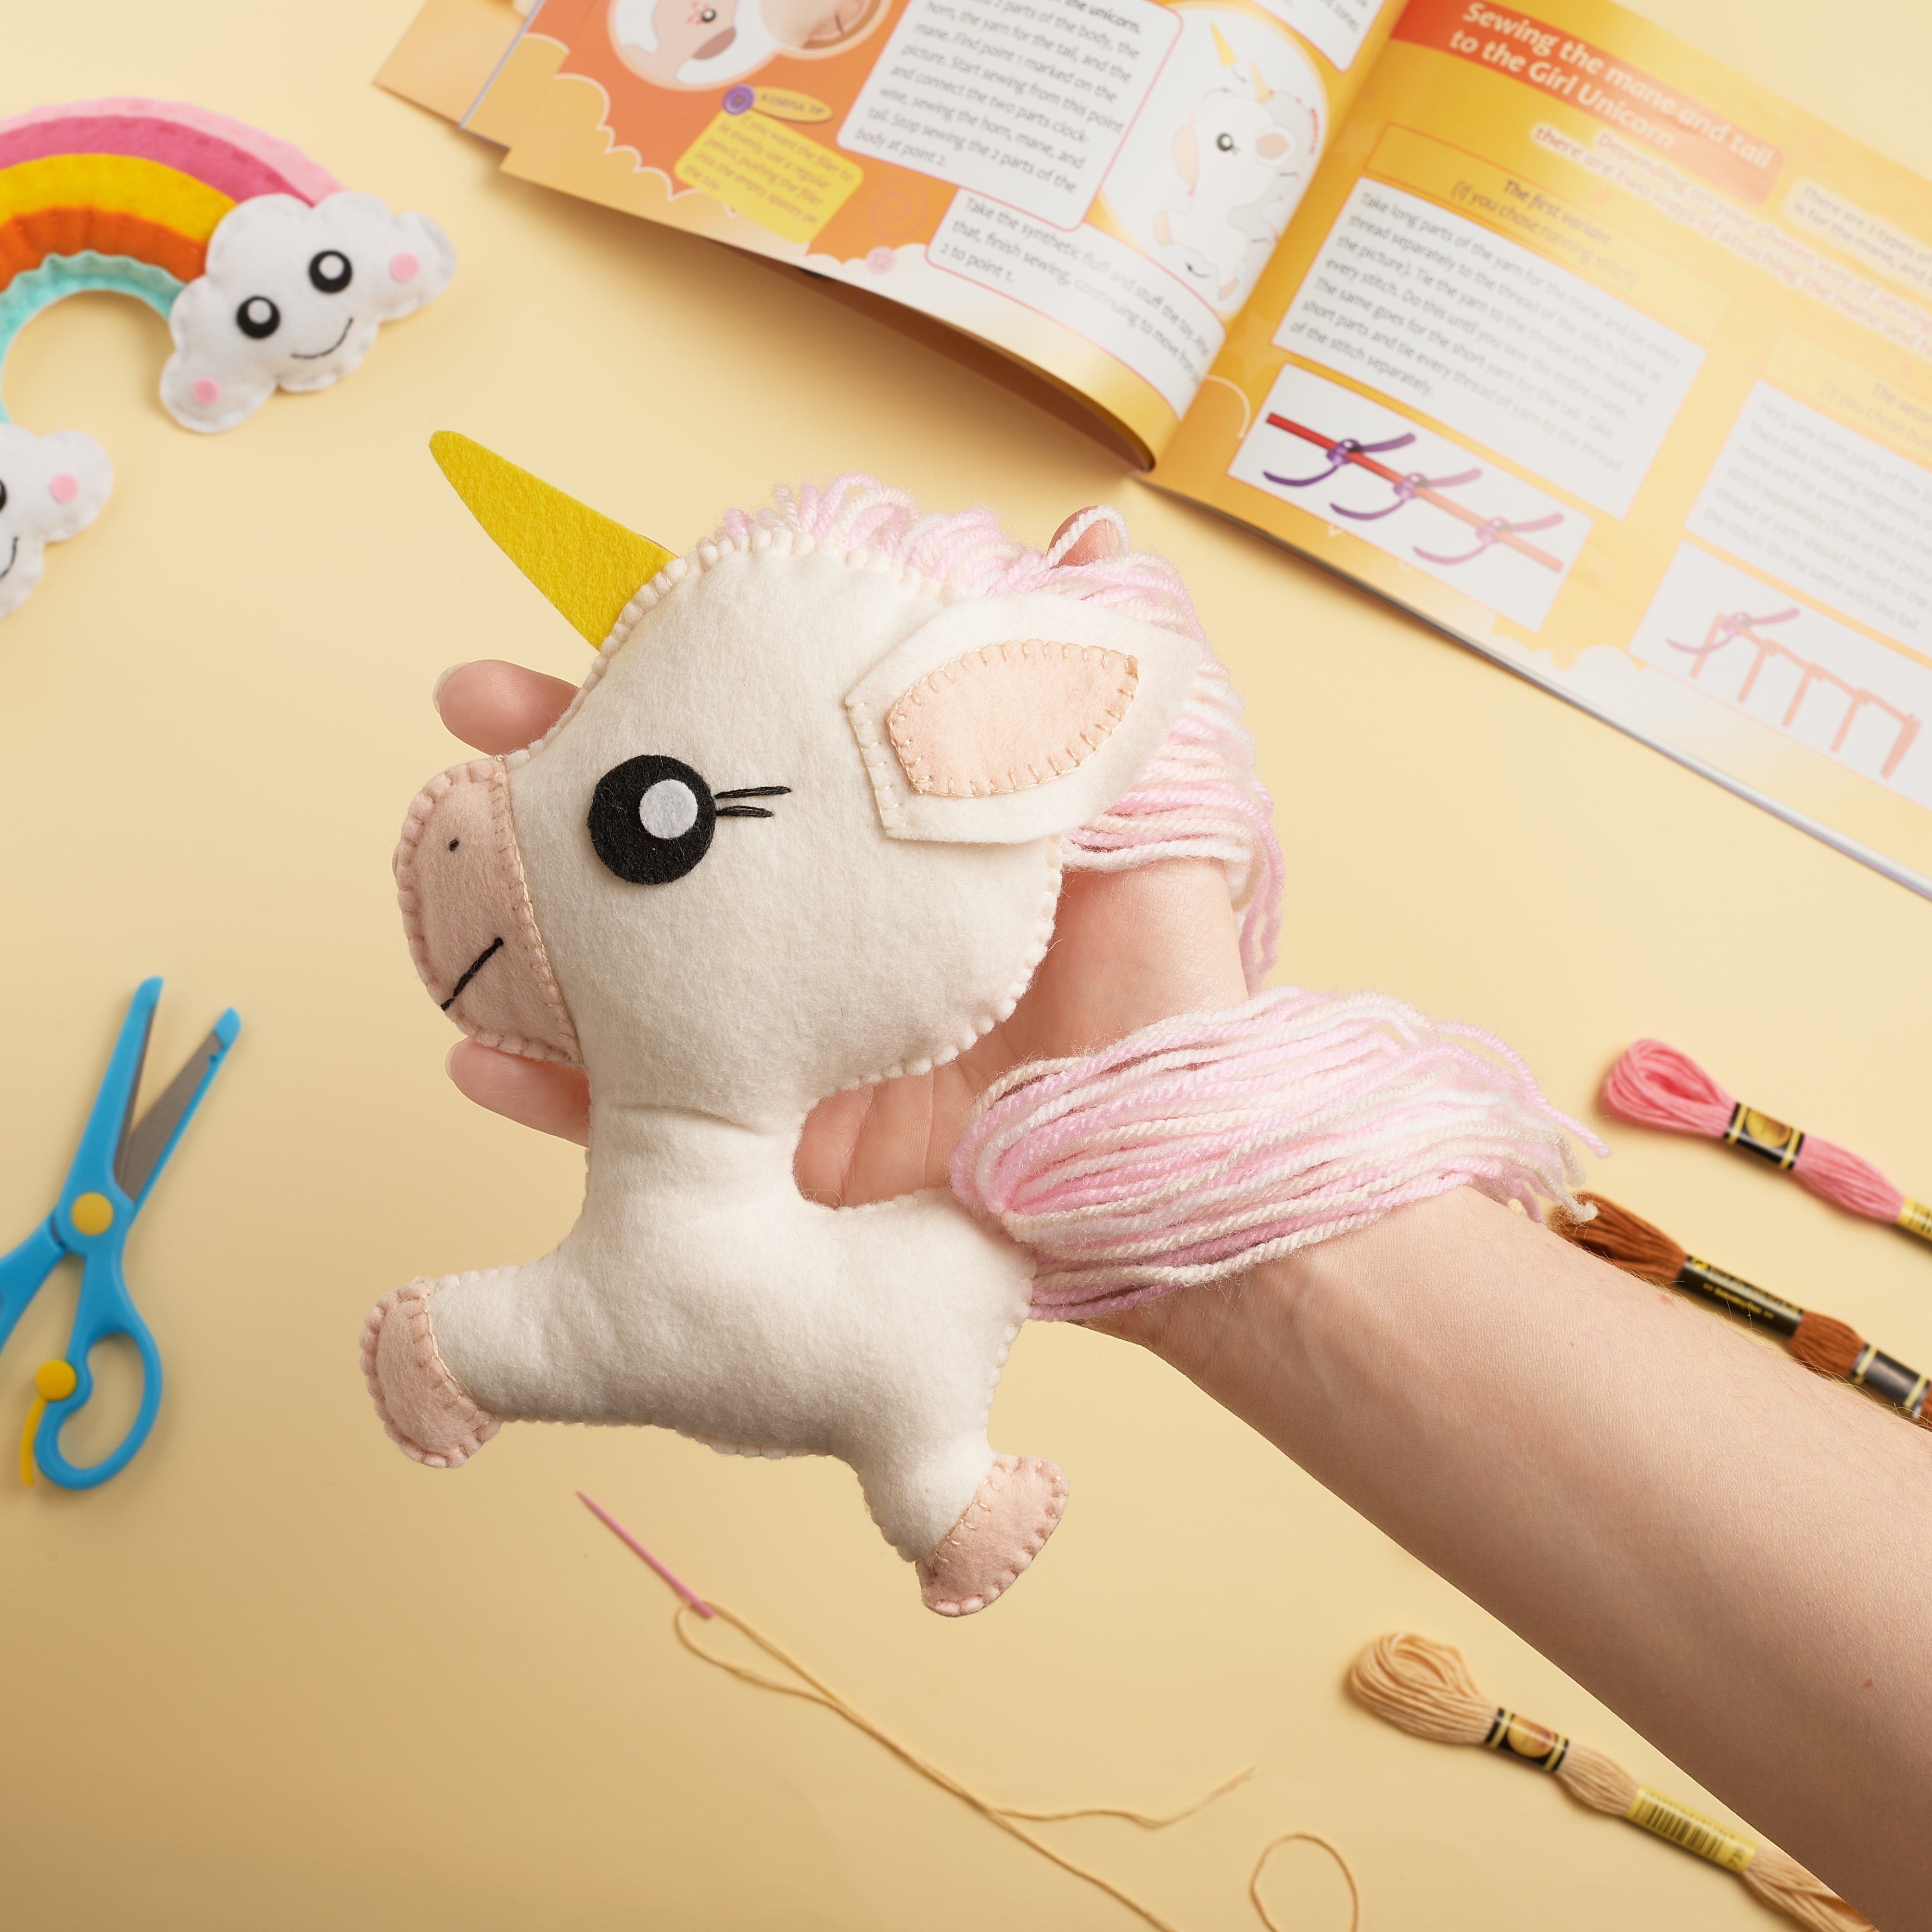  dooipoo Make a Unicorn Friend Fashion Designer Kit, Felt Sewing  Kit for Kids, Learn to Make 1 Easy-to-Sew Stuffie with Clothes &  Accessories : Toys & Games